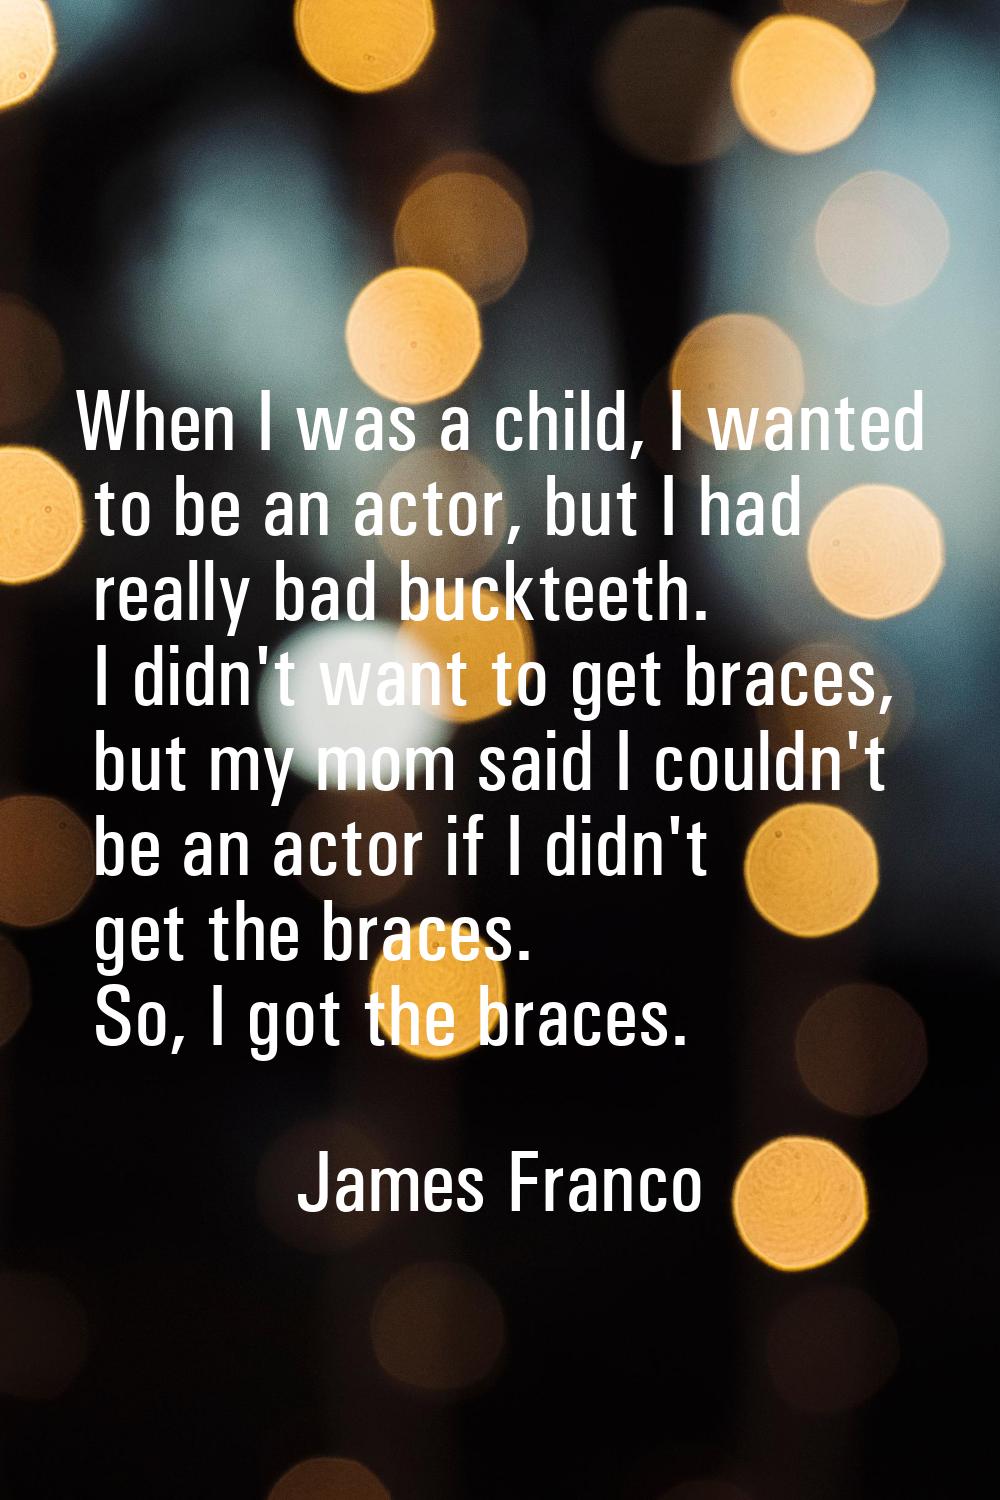 When I was a child, I wanted to be an actor, but I had really bad buckteeth. I didn't want to get b